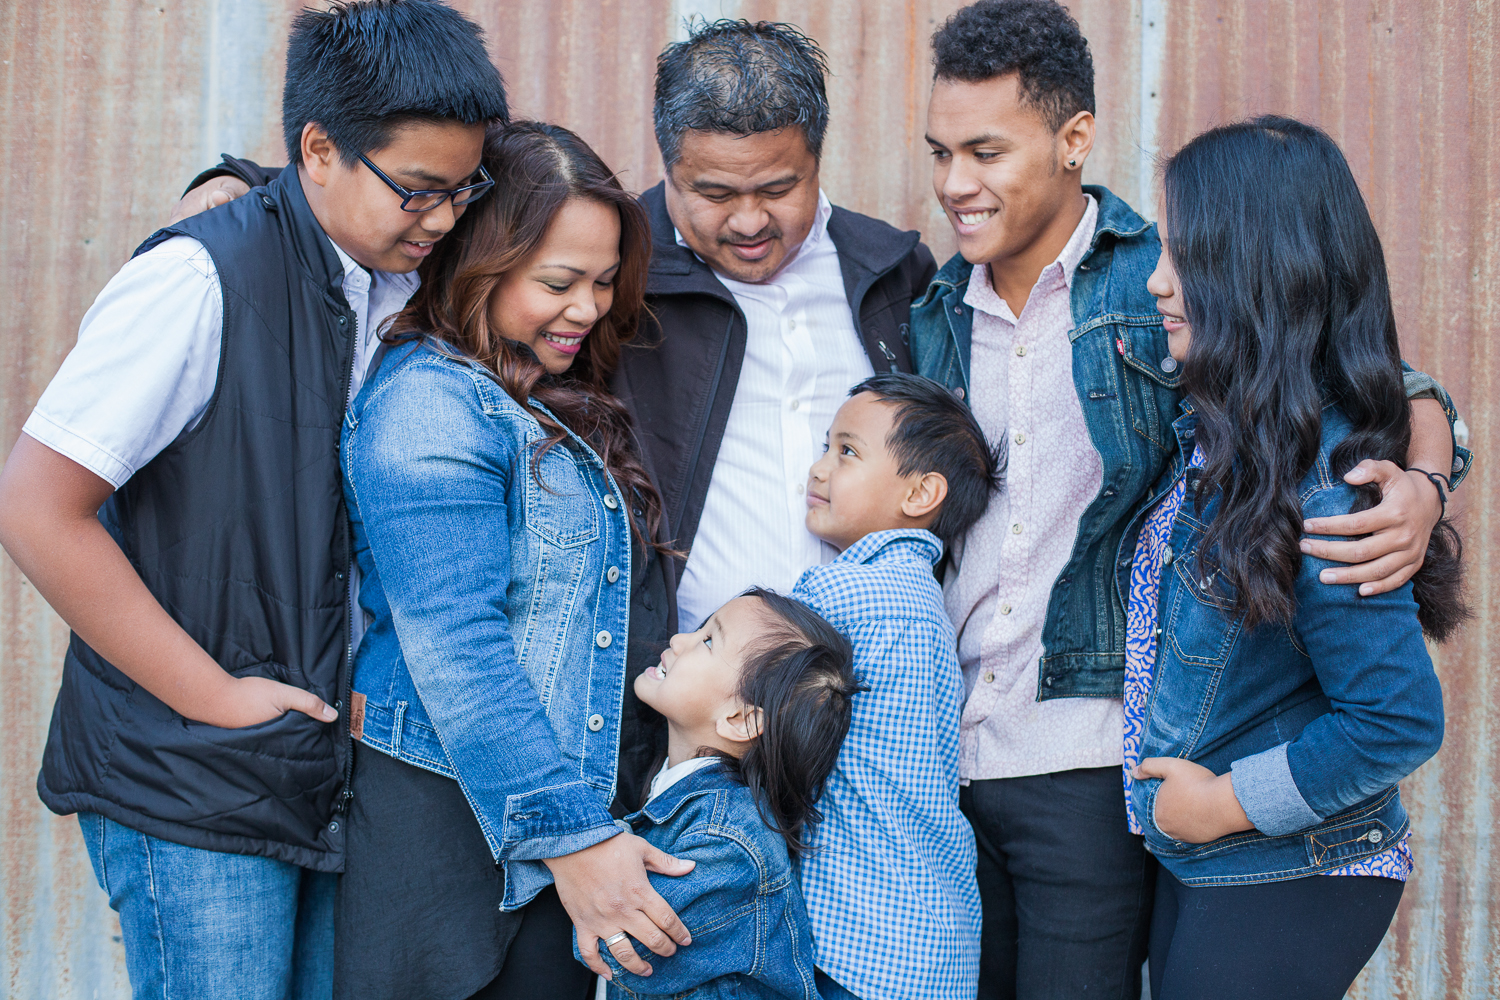 Sales Family Portraits | Old Town Temecula, CA